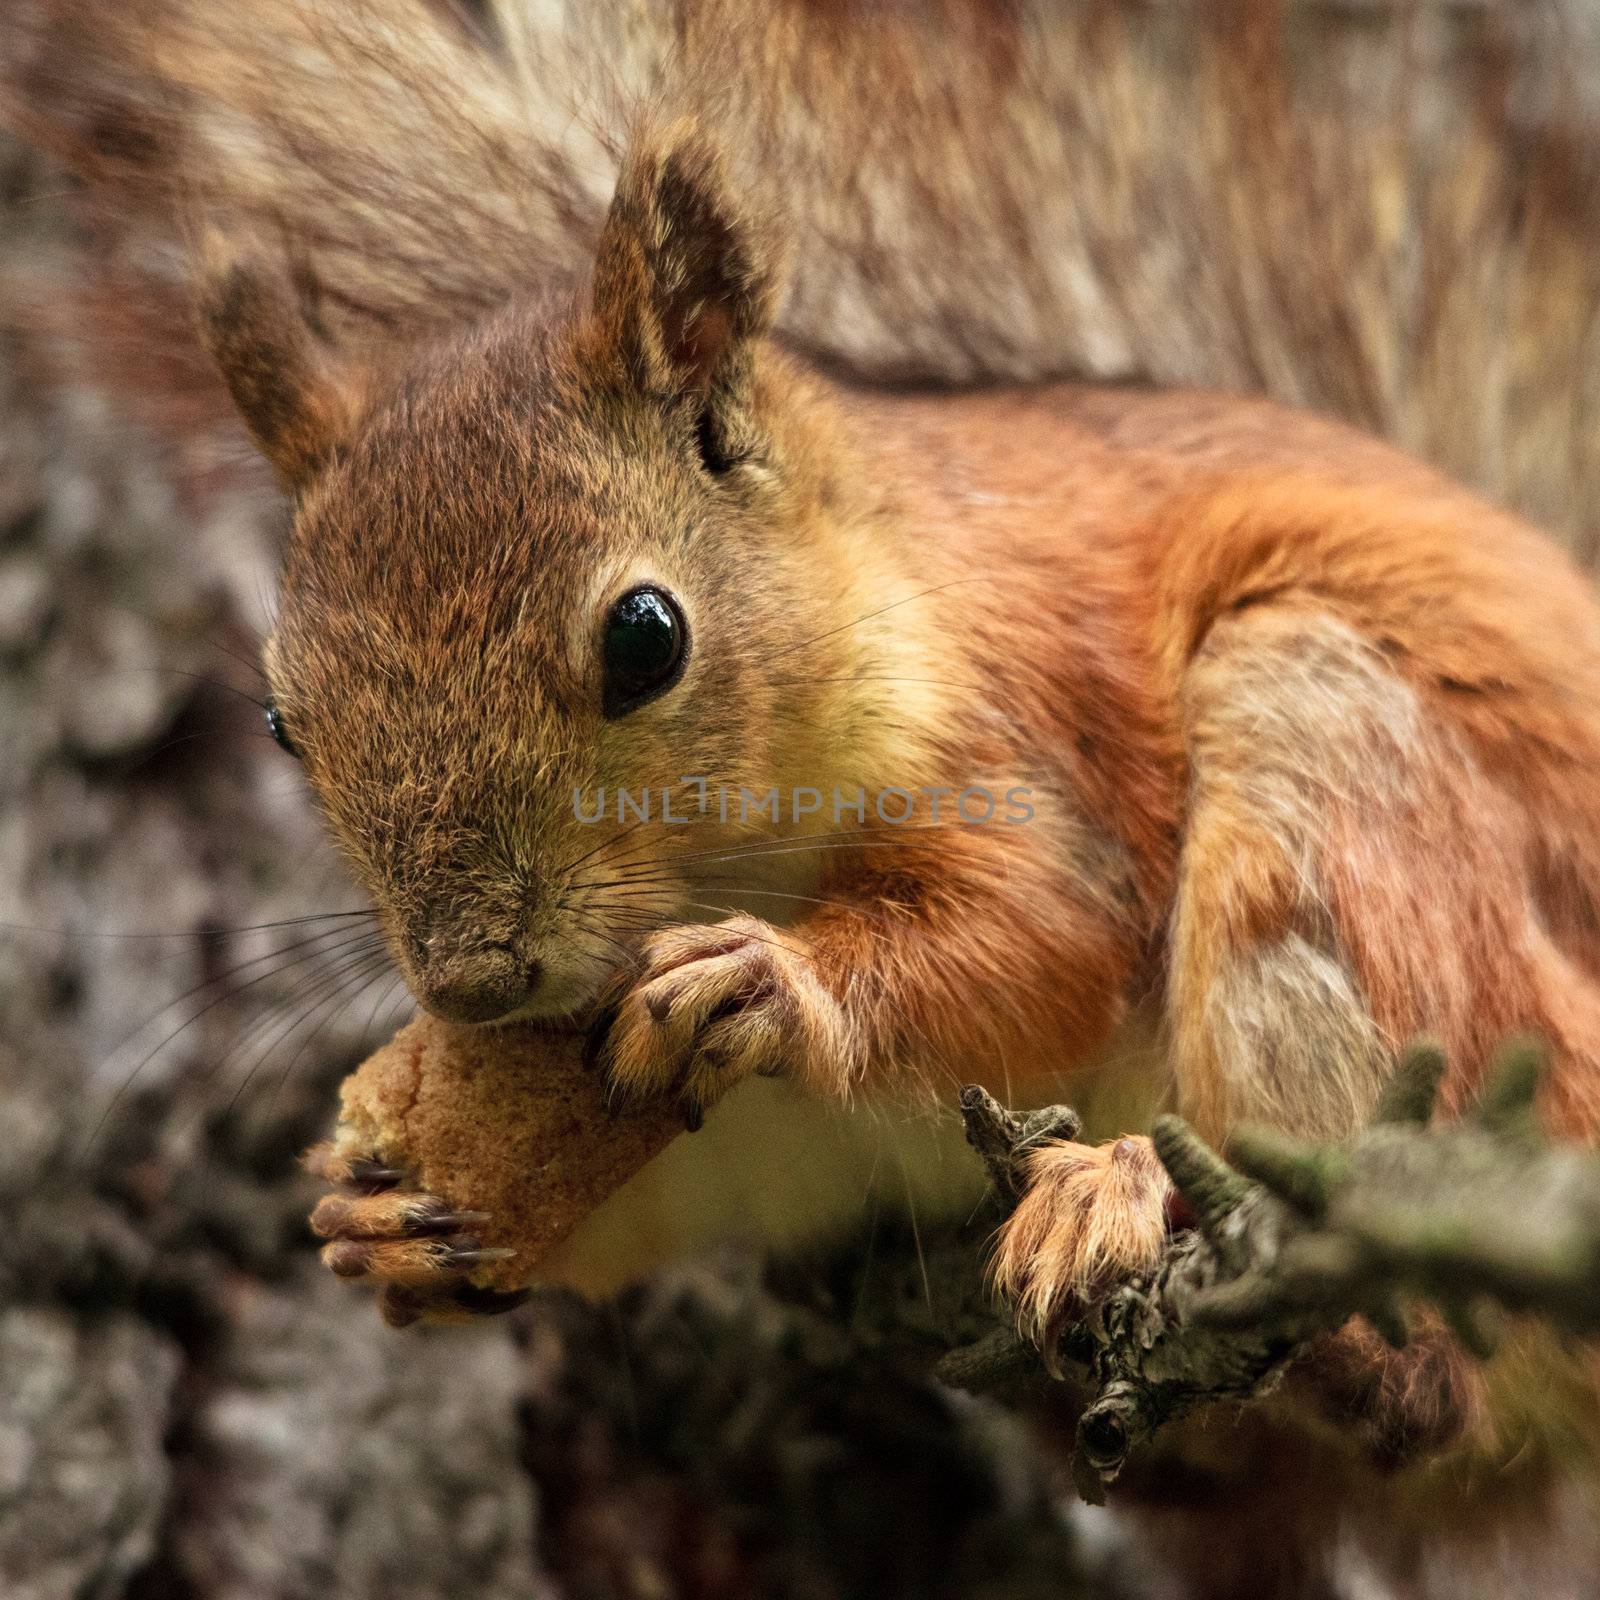 red squirrel on branch eating bread crust